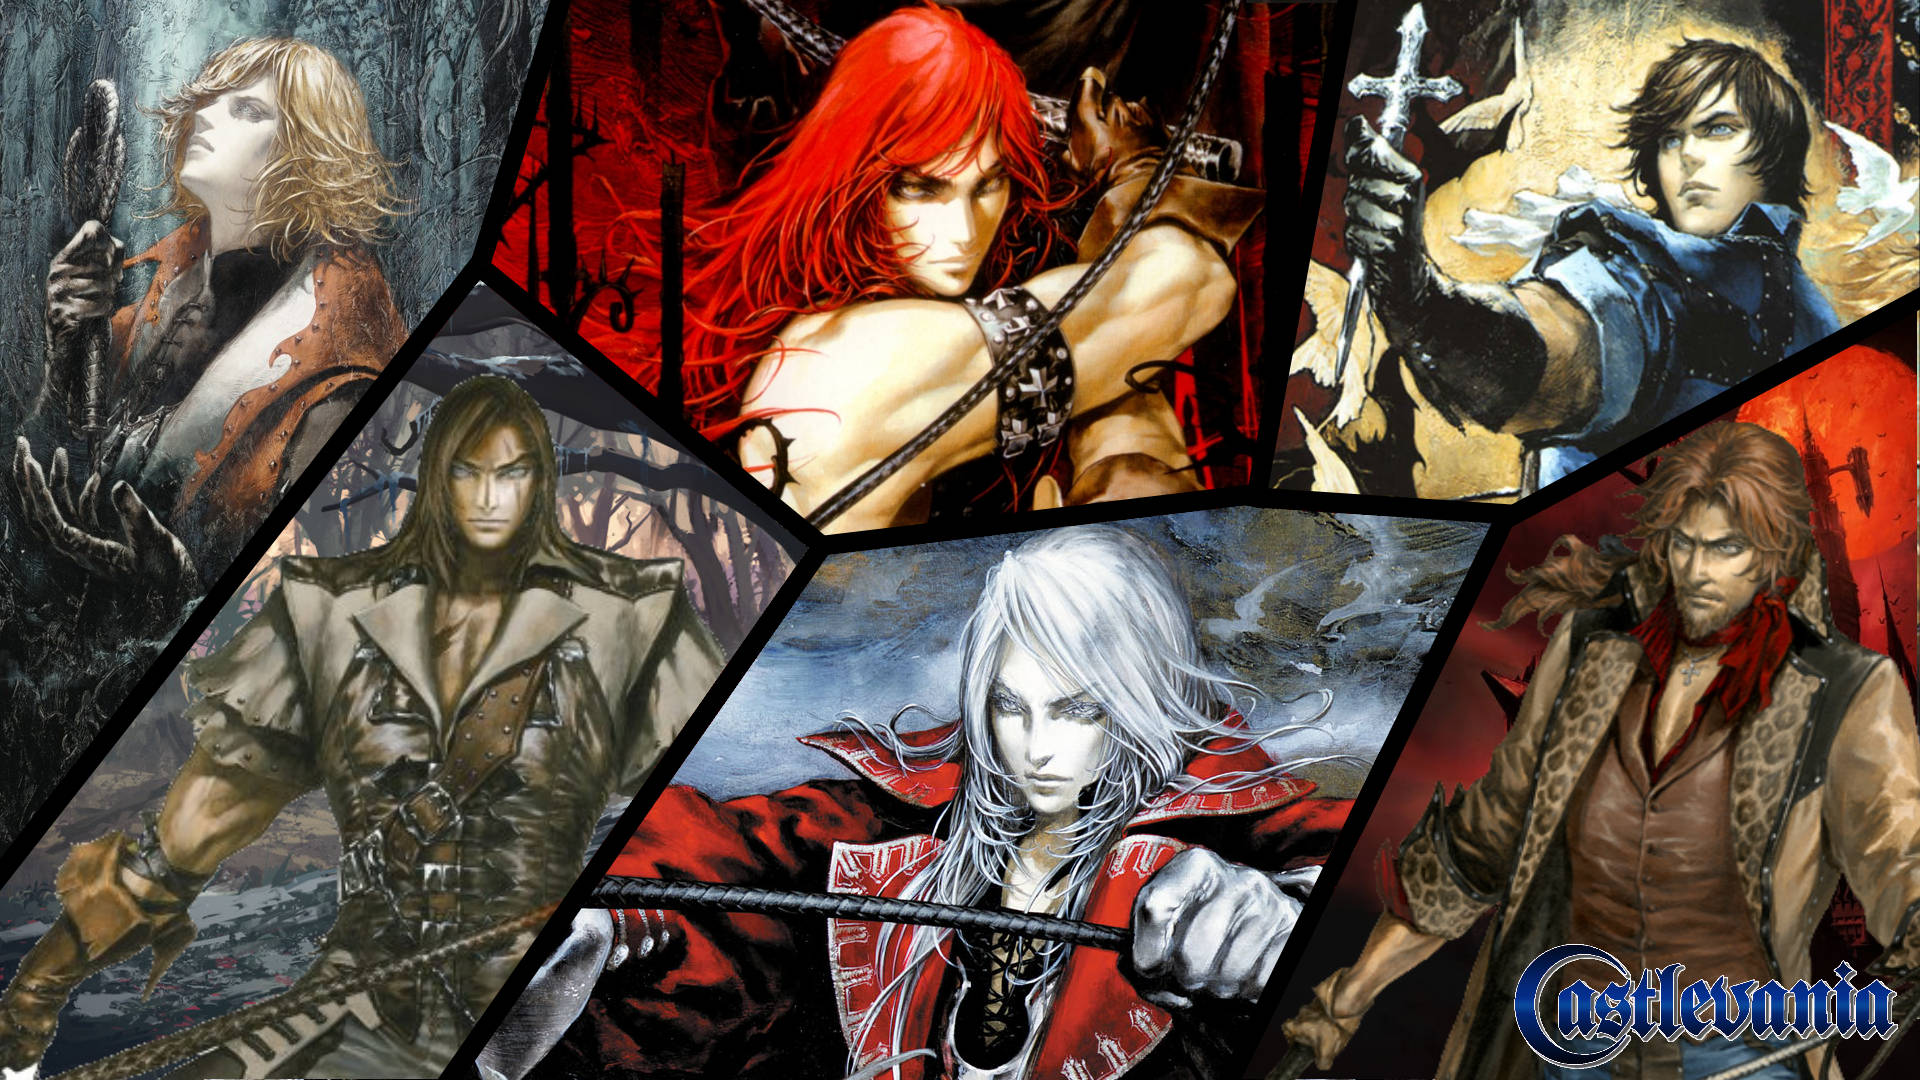 Castlevania Belmont Family Banners